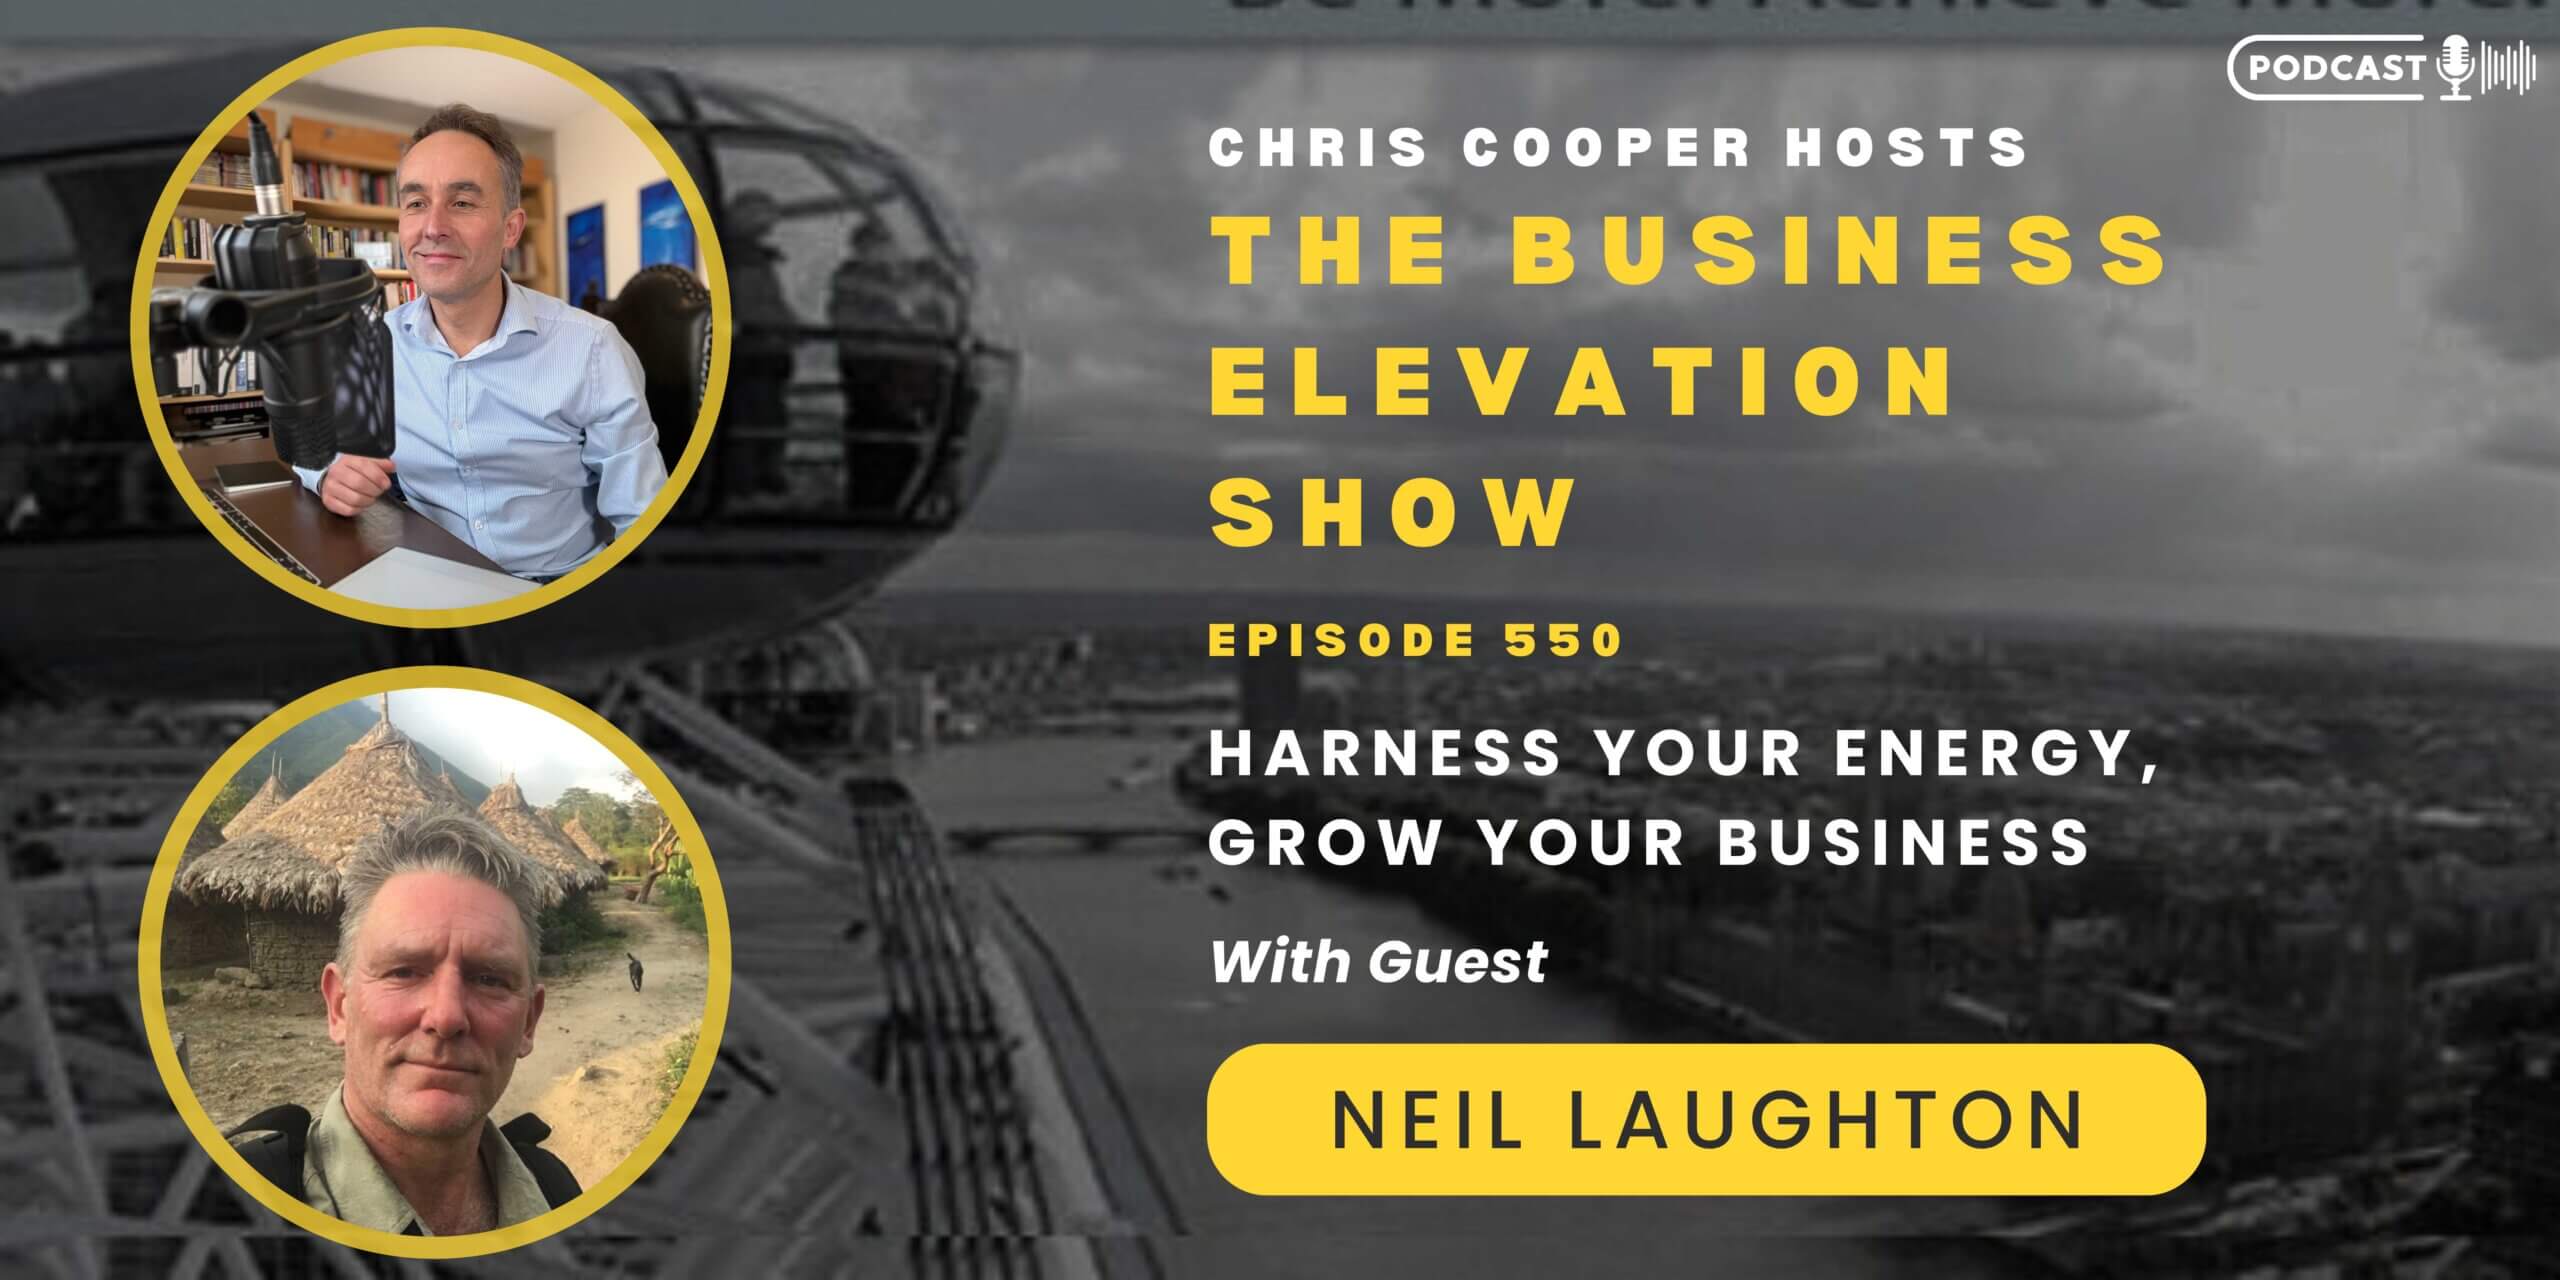 Banner of The Business Elevation Show Episode 550 on Harness Your Energy, Grow Your Business with Chris Cooper and Neil Laughton